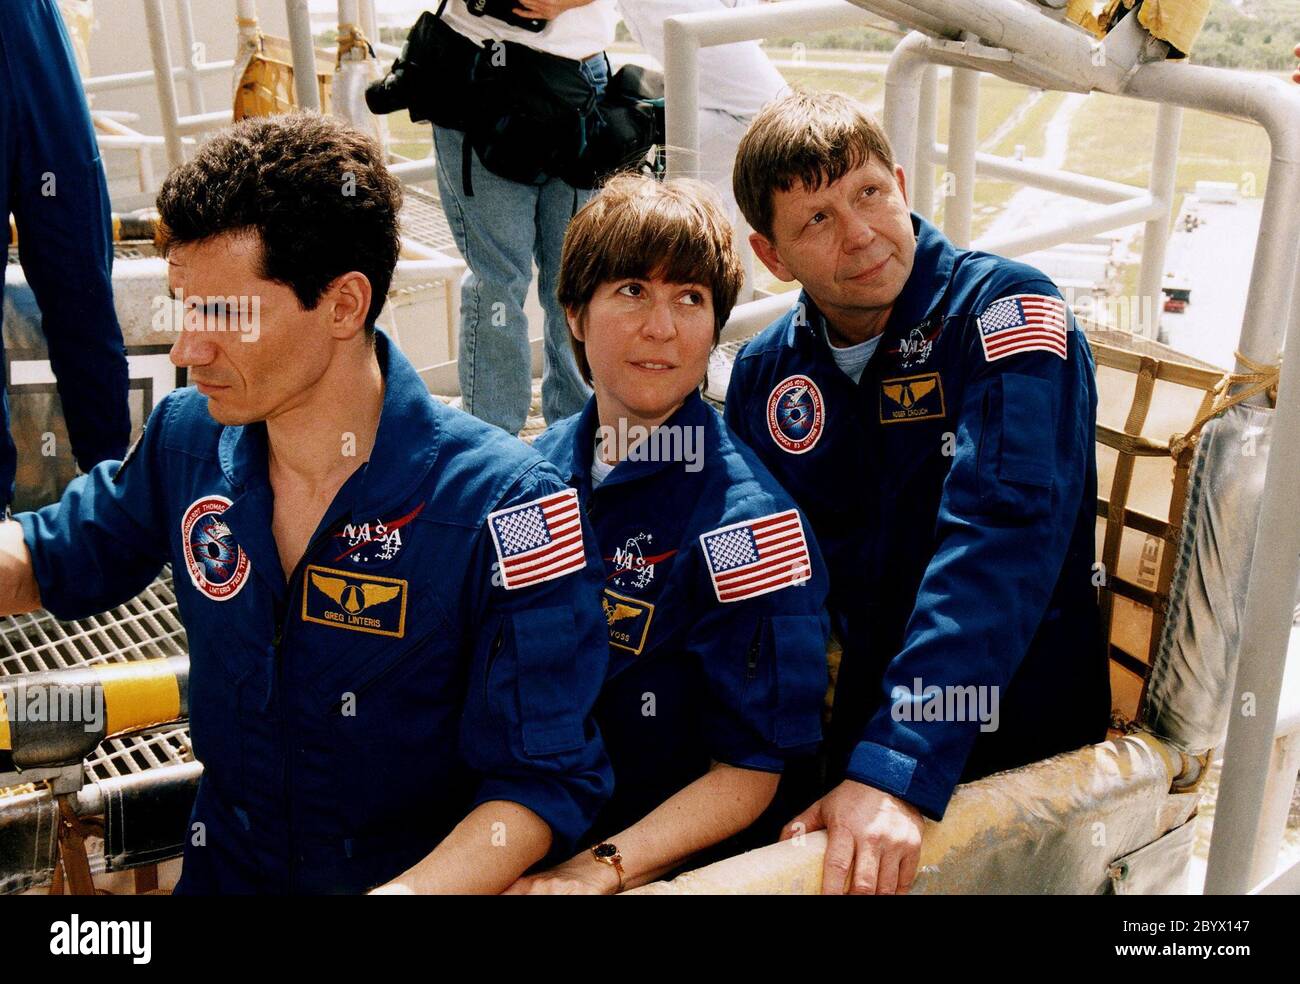 STS-83 Payload Specialist Gregory T. Linteris, Mission Specialist Janice E. Voss, and Payload Specialist Roger K. Crouch participate in emergency egress training at Launch Complex 39A during the crew's Terminal Countdown Demonstration Test (TCDT). They are seen here in one of the pads' seven slidewire baskets. Stock Photo